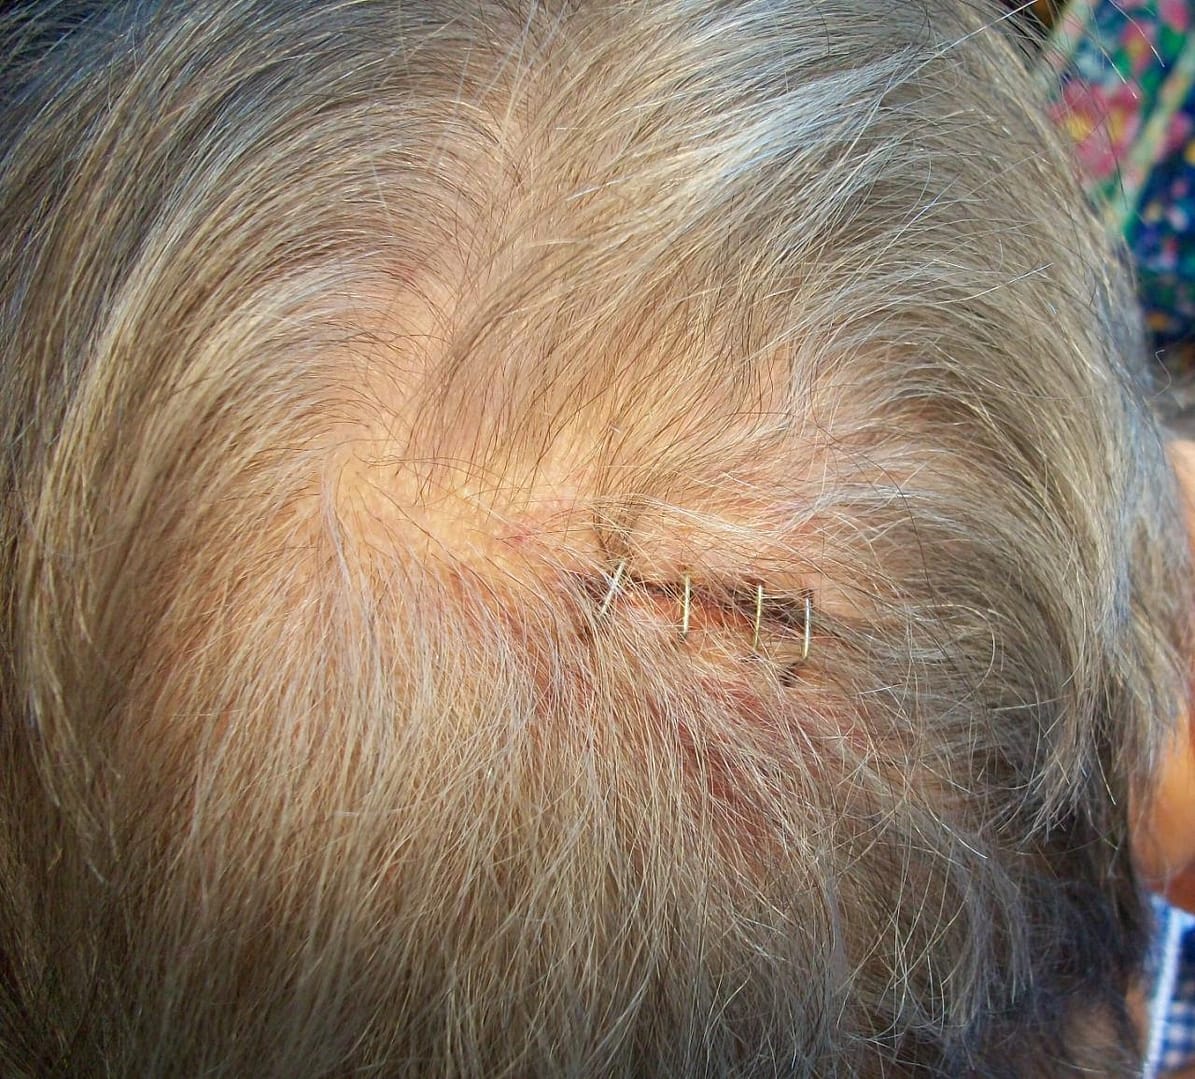 Understanding Why Staples Instead of Stitches on Head